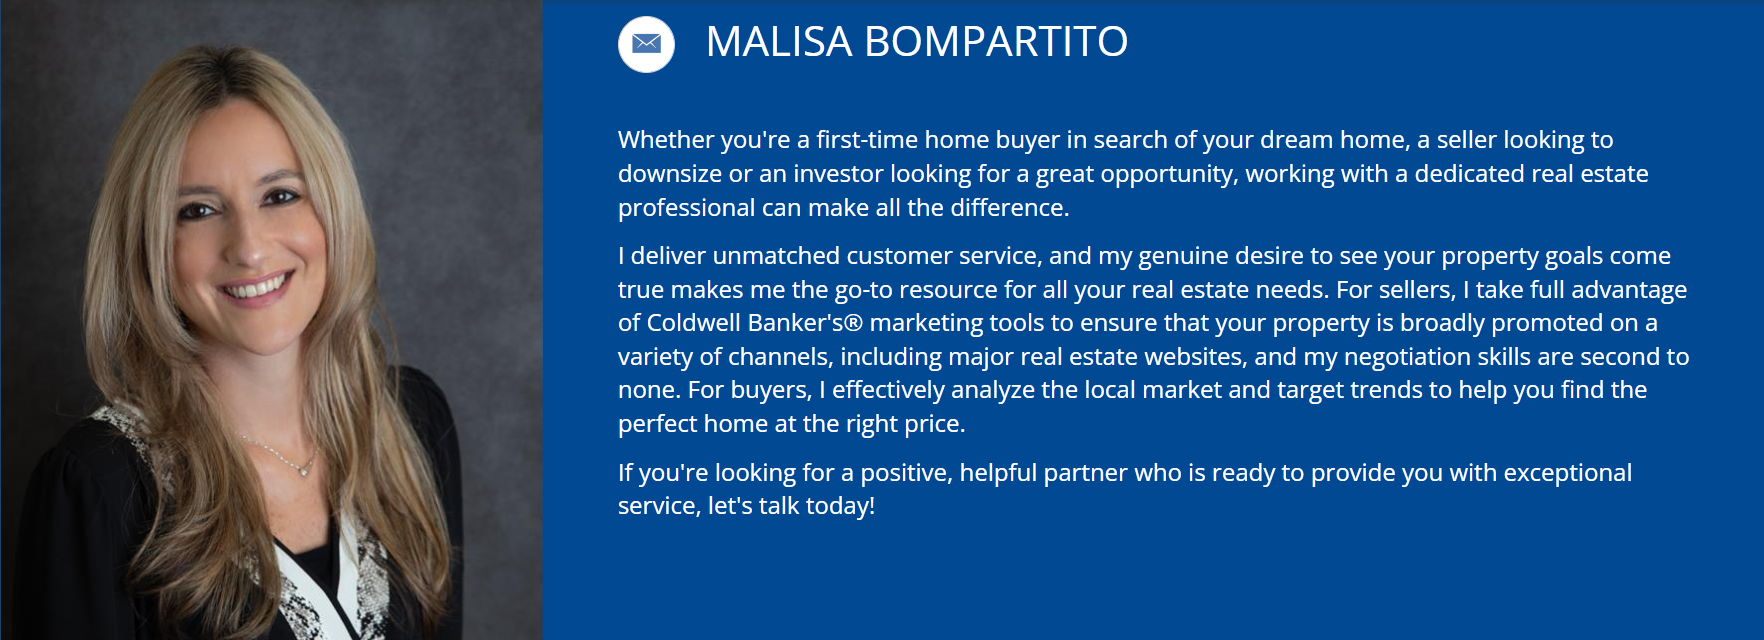 Malisa Bomparitito Coldwell Banker Realty - Howell Office